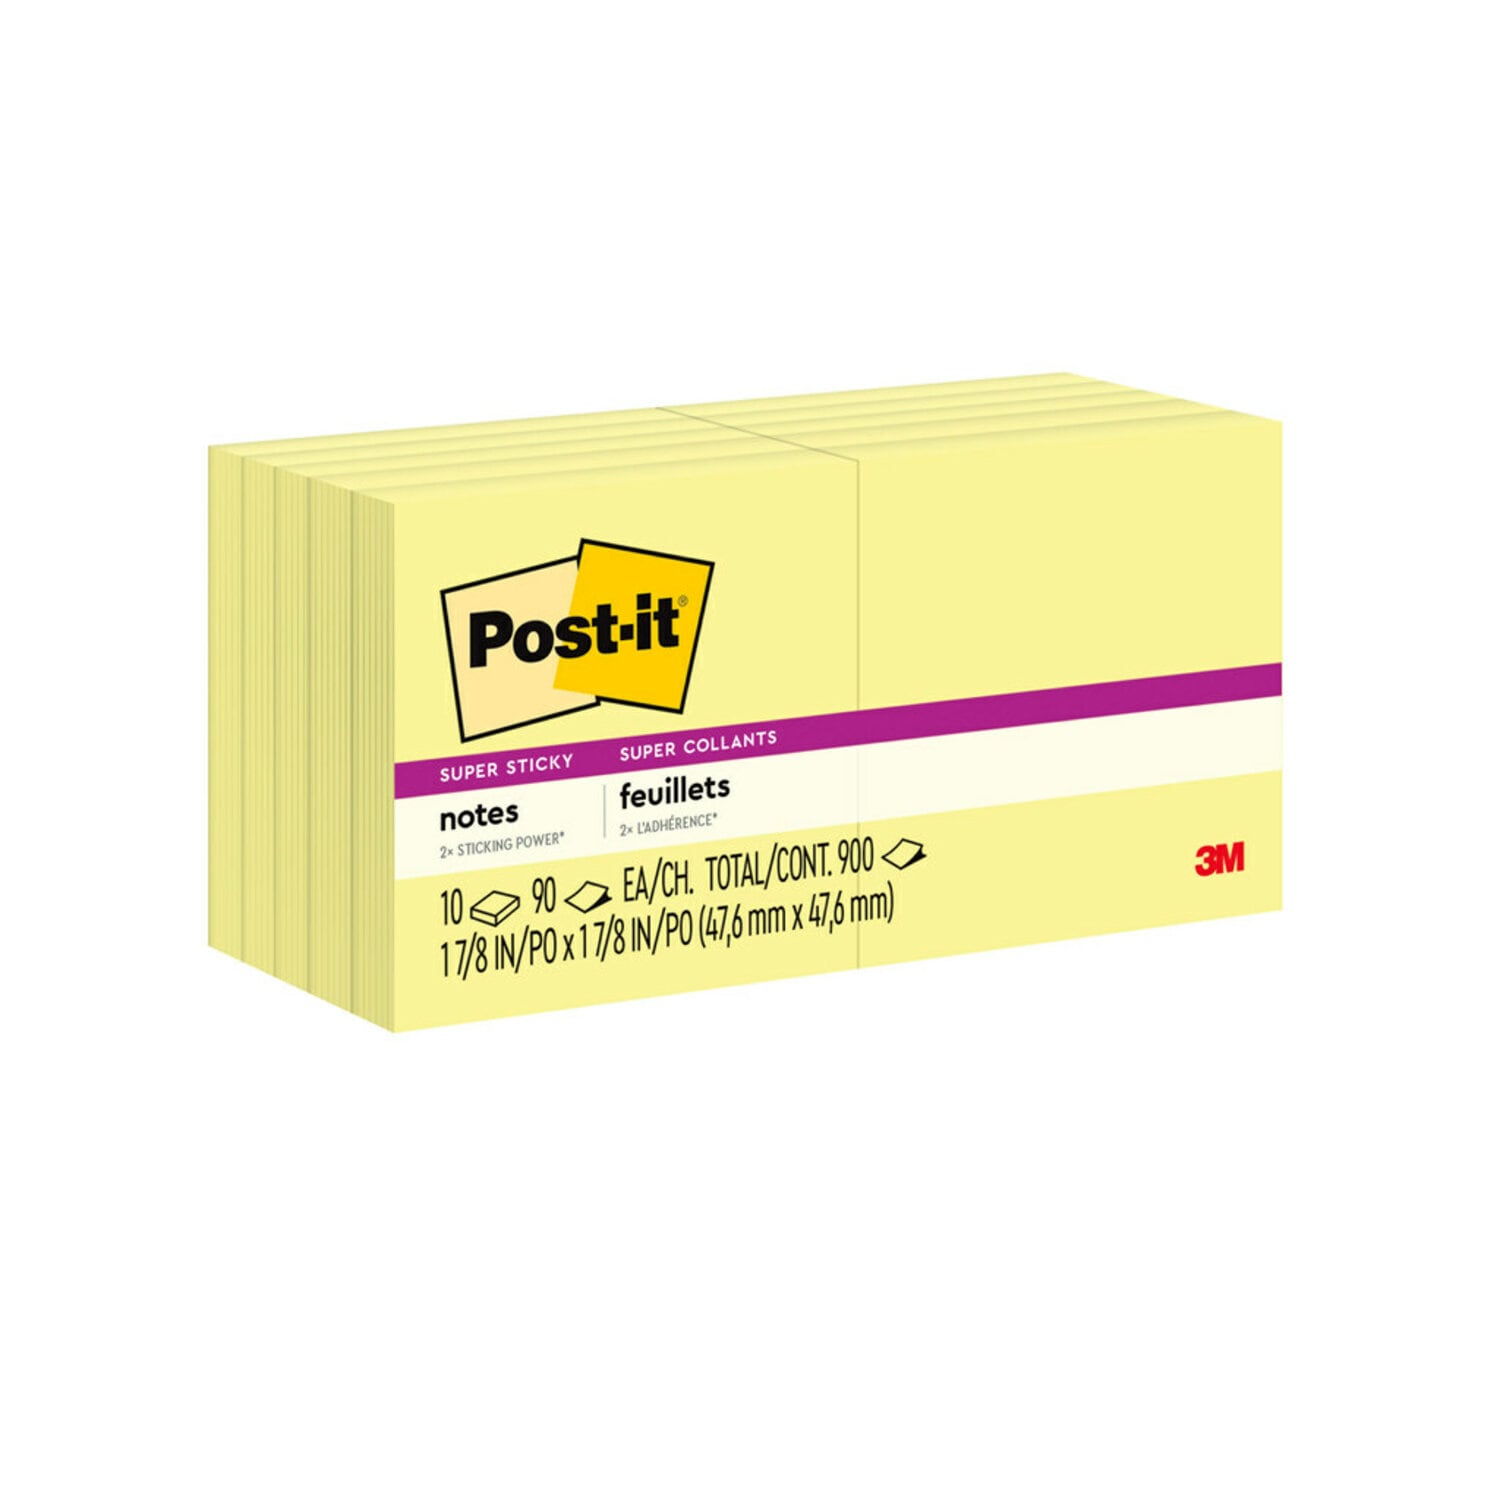 7010314966 - Post-it Super Sticky Notes 654-10SSCY, 3 in x 3 in (7.62 cm x 7.62 cm)
Canary Yellow 10-pack